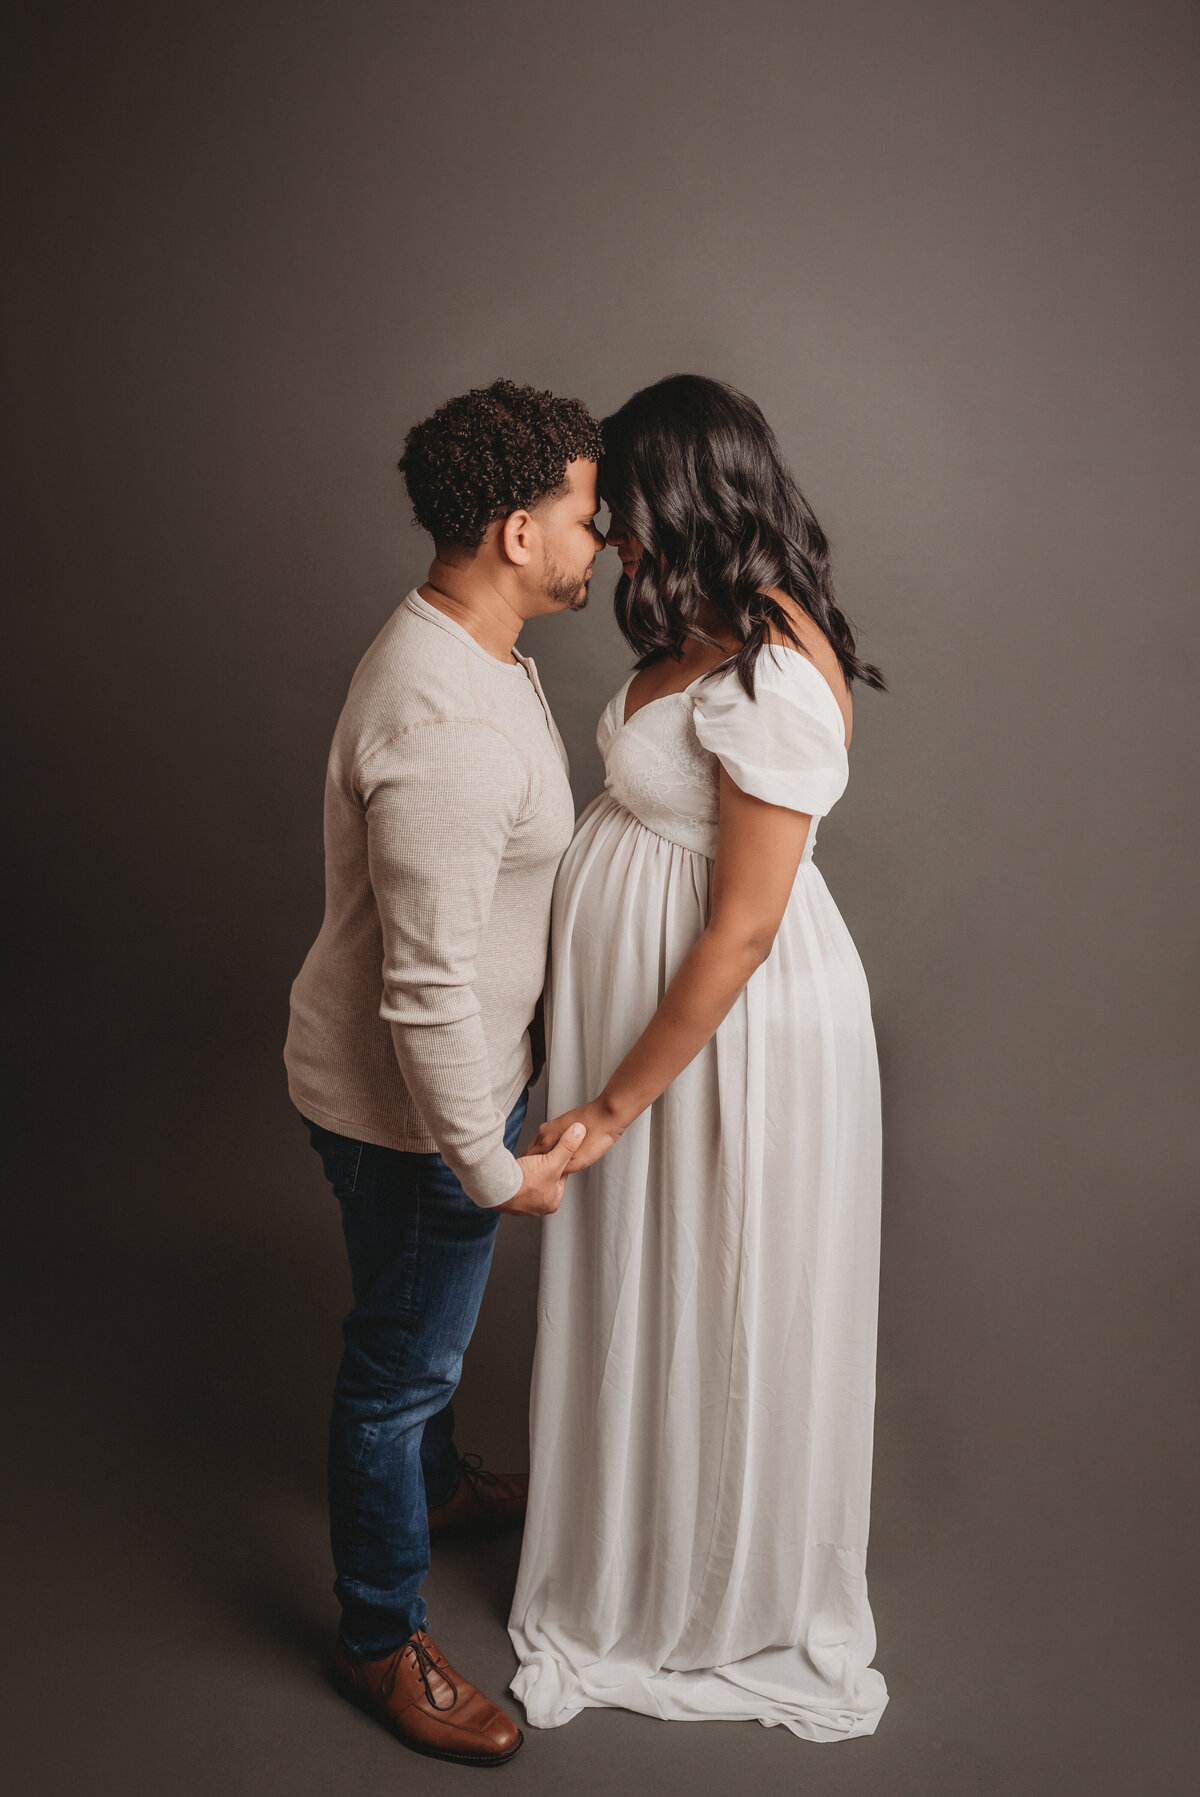 Man and woman 36 weeks pregnant facing each other, foreheads touching and holding hands. Woman is wearing white sheer maternity dress and man is wearing a cream long sleeve shirt with jeans and brown shoes.